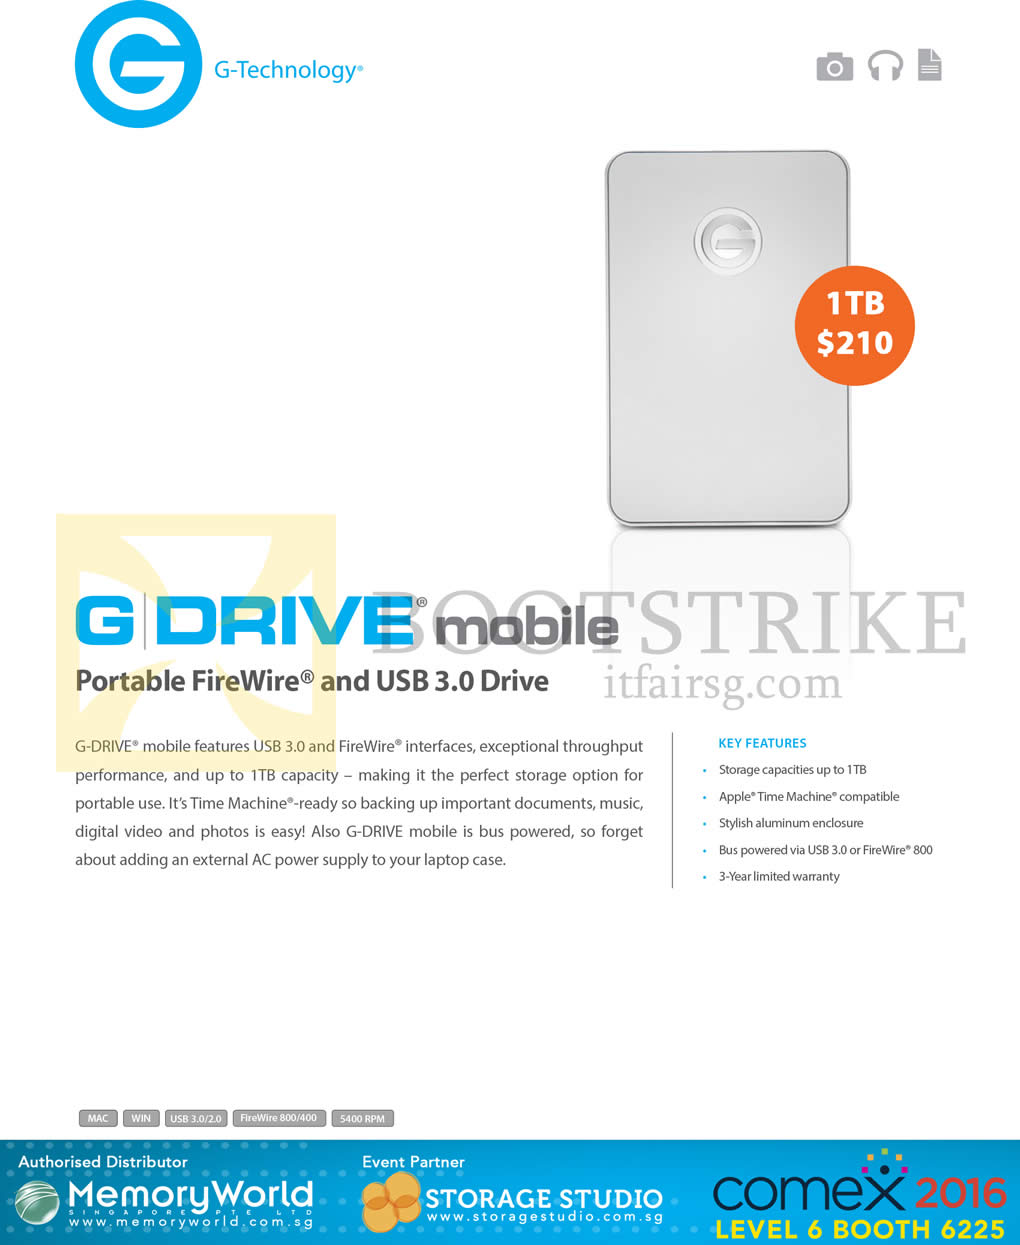 COMEX 2016 price list image brochure of Memory World G-Technology Portable Firewire USB G Drive Mobile 1TB